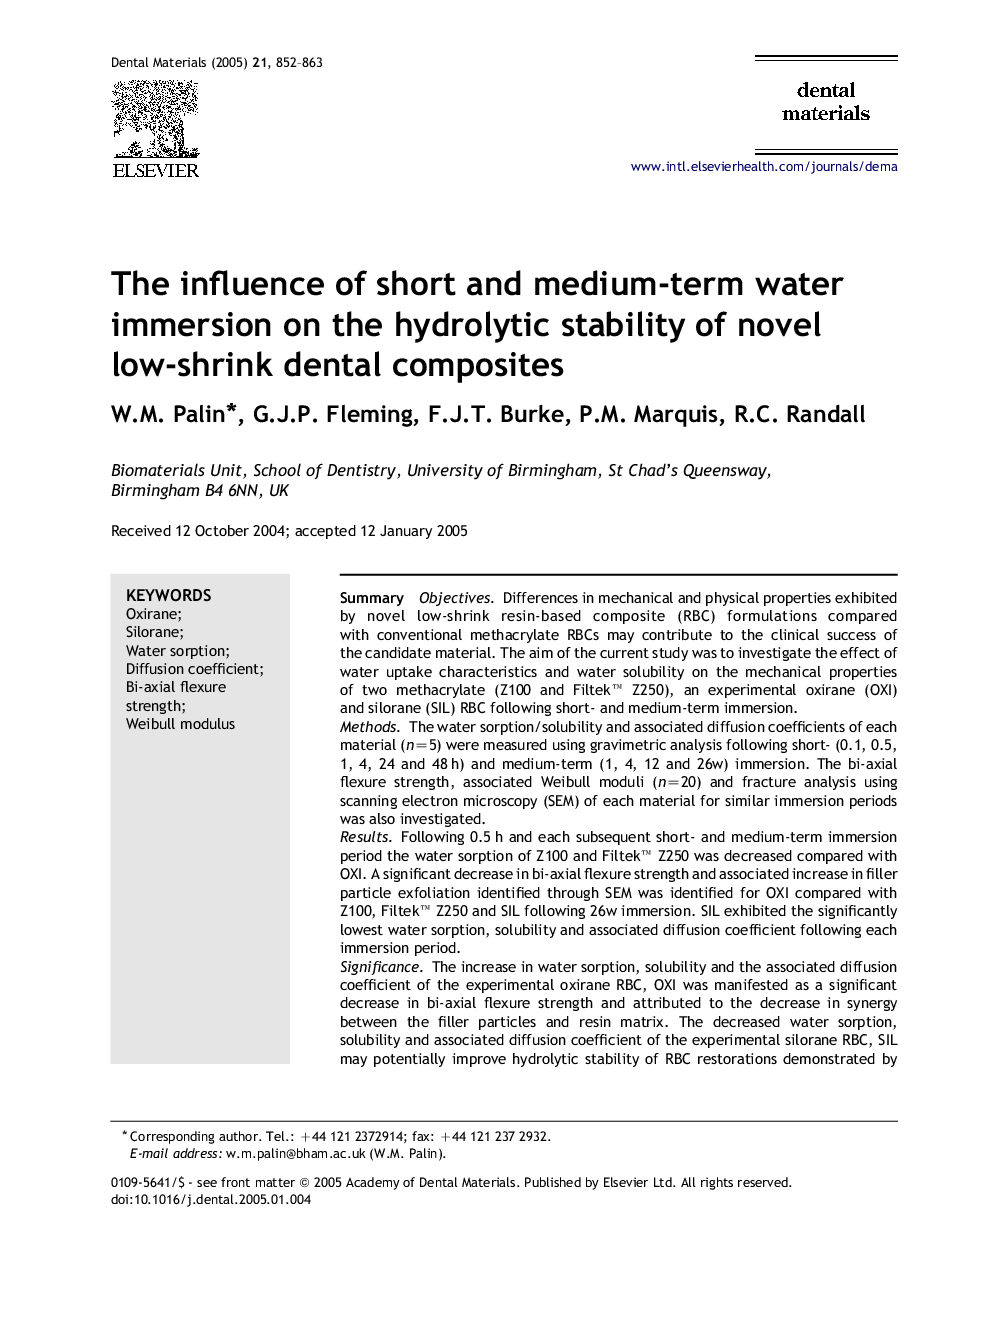 The influence of short and medium-term water immersion on the hydrolytic stability of novel low-shrink dental composites